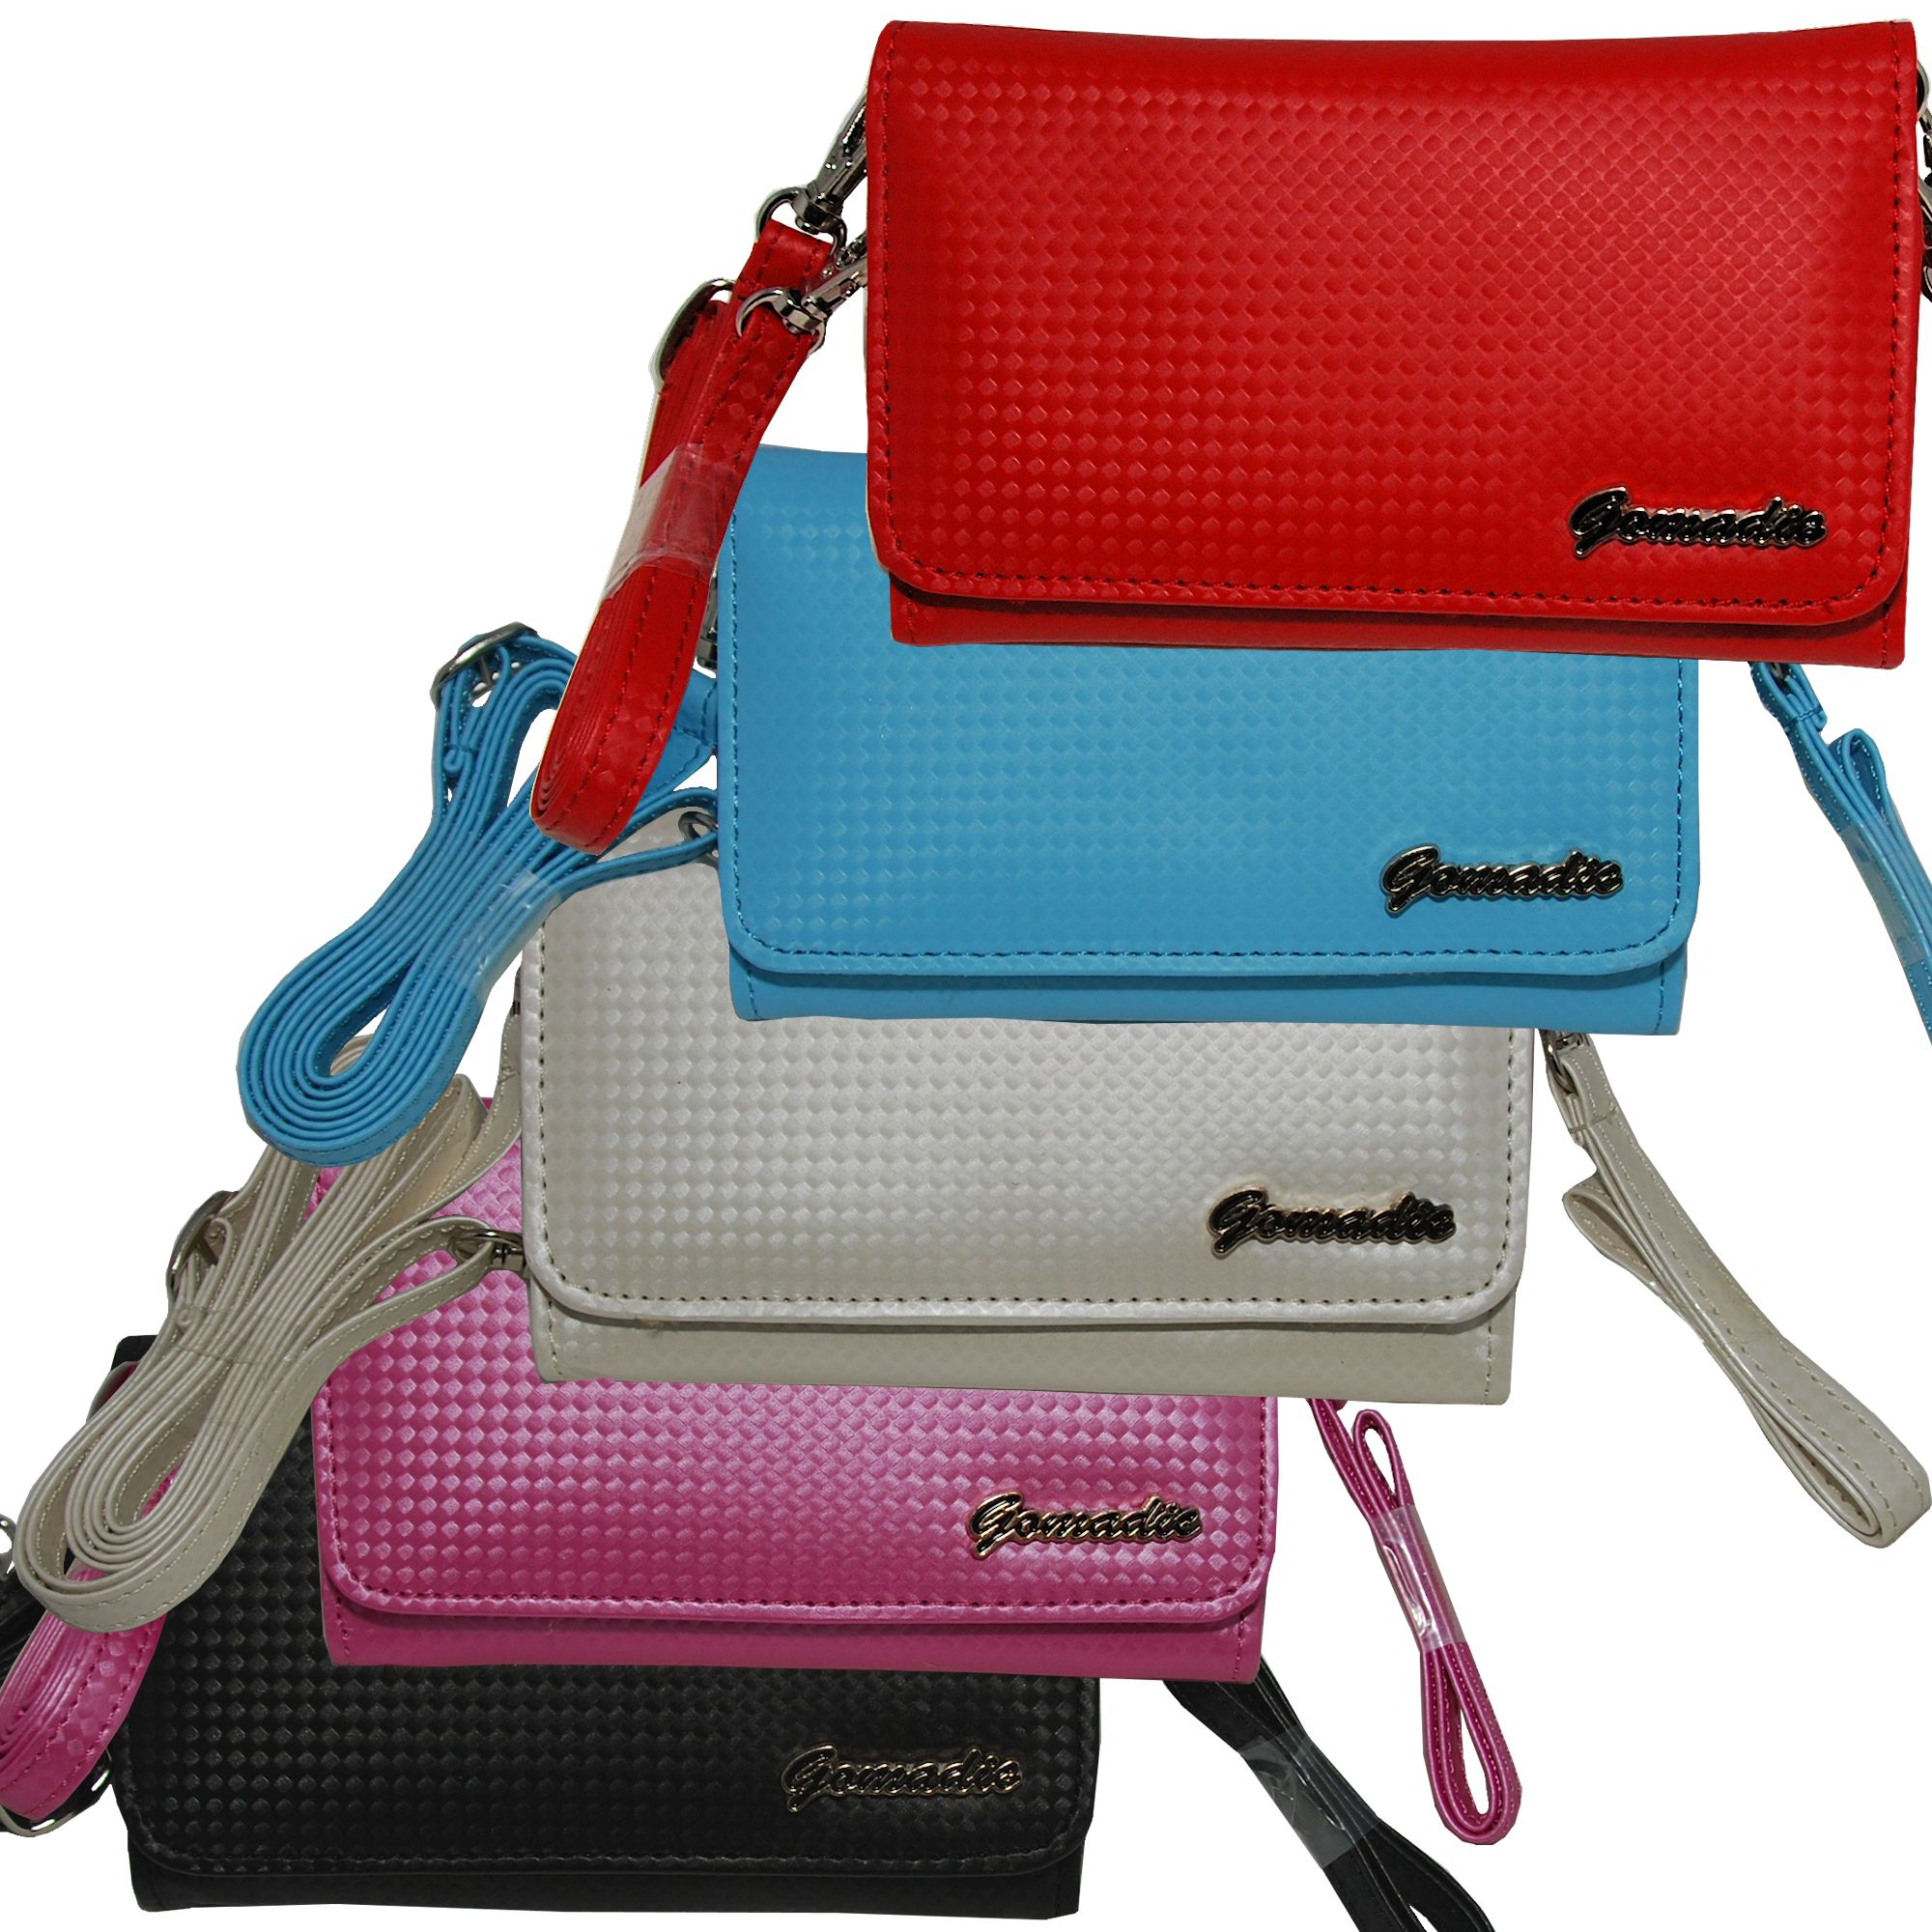 Purse Handbag Case for the Nokia 5130 5220 5300 5310  - Color Options Blue Pink White Black and Red